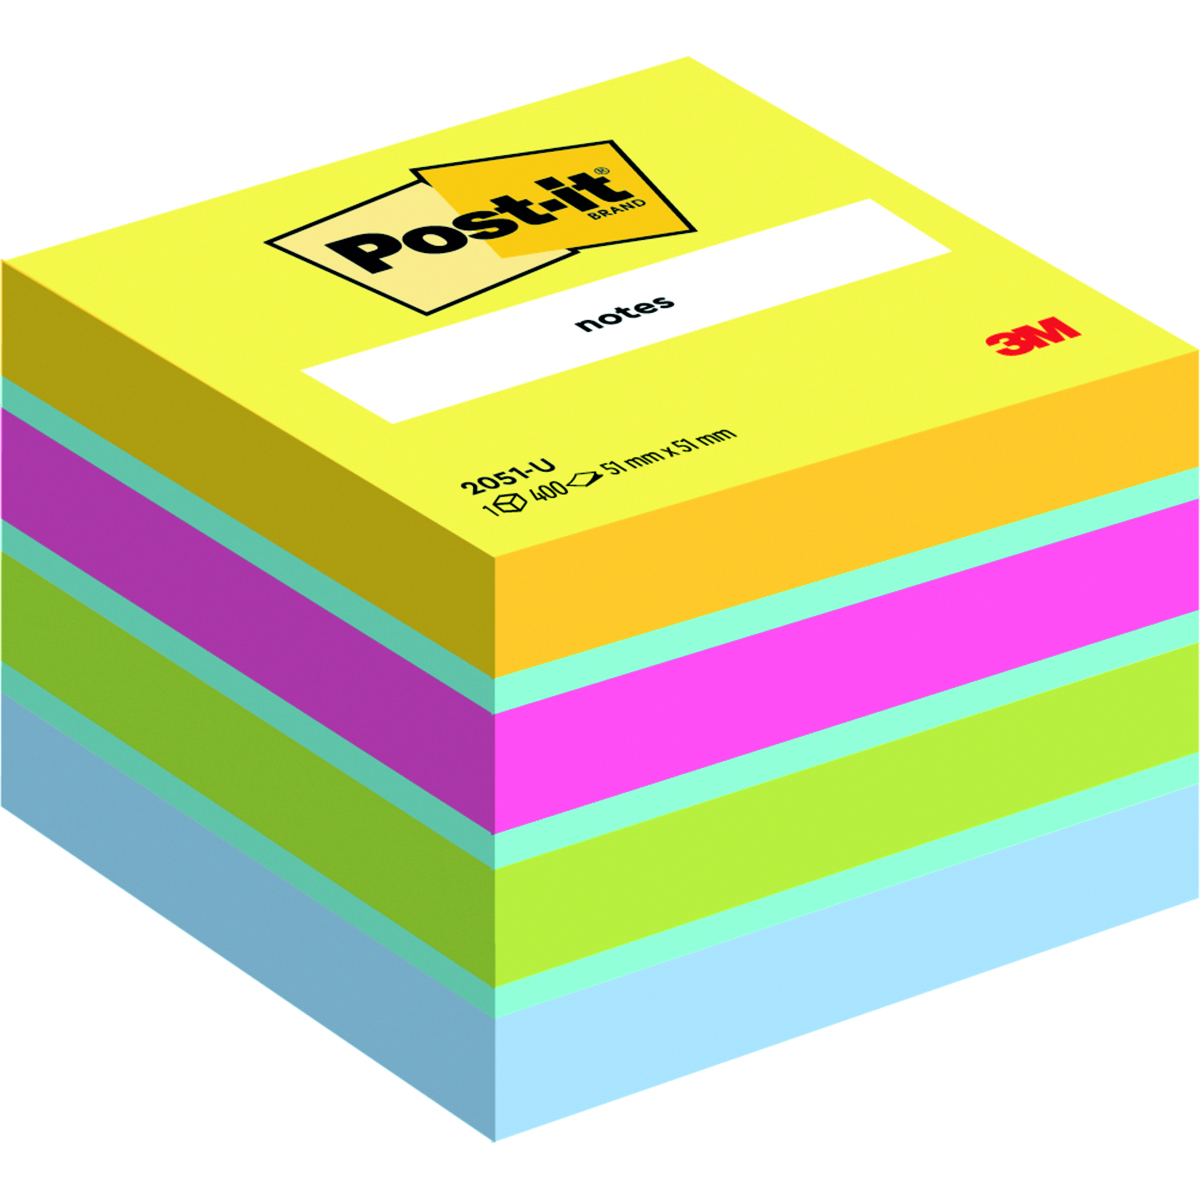  Post-it Notes - Mini Cube - Neon Yellow, Ultra Green, Ultra  Blue, Ultra Green, Neon Yellow - 400 Sheets - 51 mm x 51 mm : Office  Products